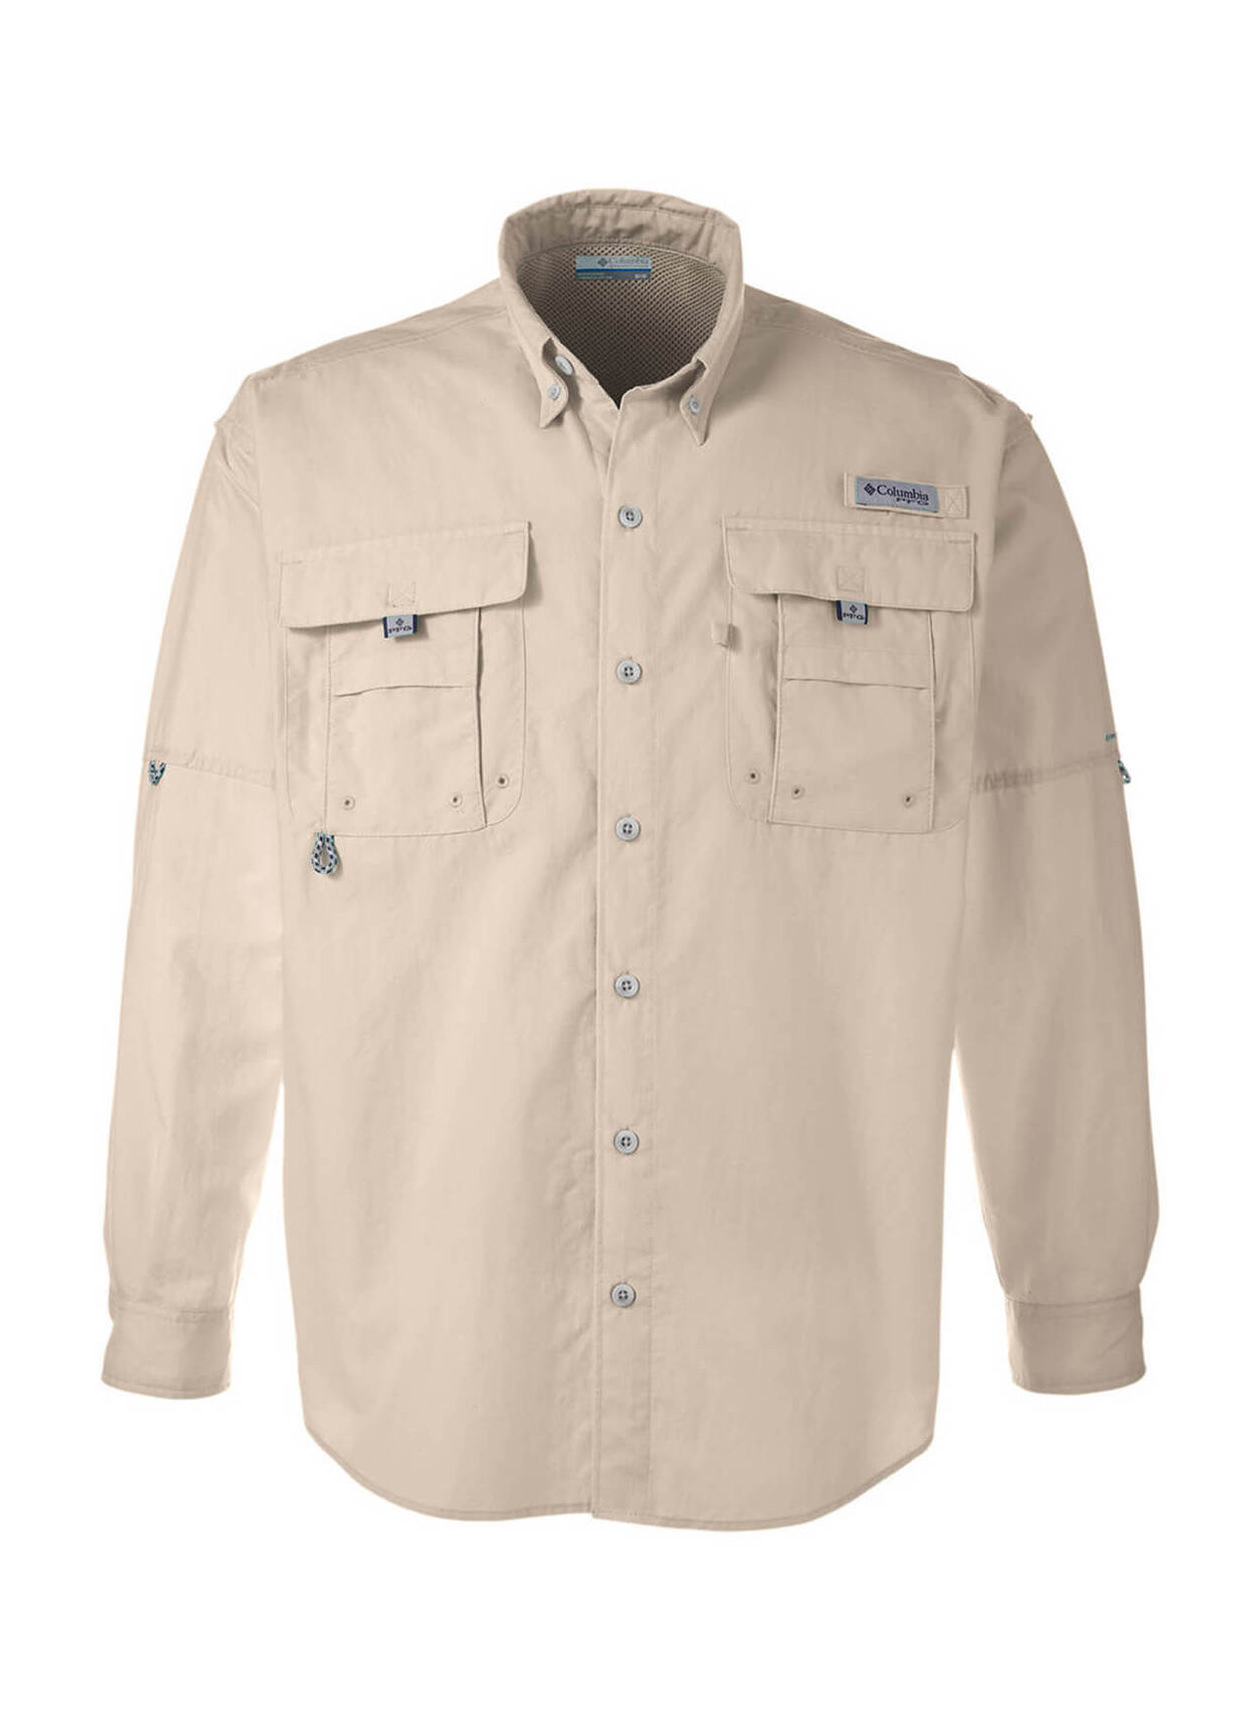 Embroidered Columbia Men's Fossil Bahama Long-Sleeve Shirt